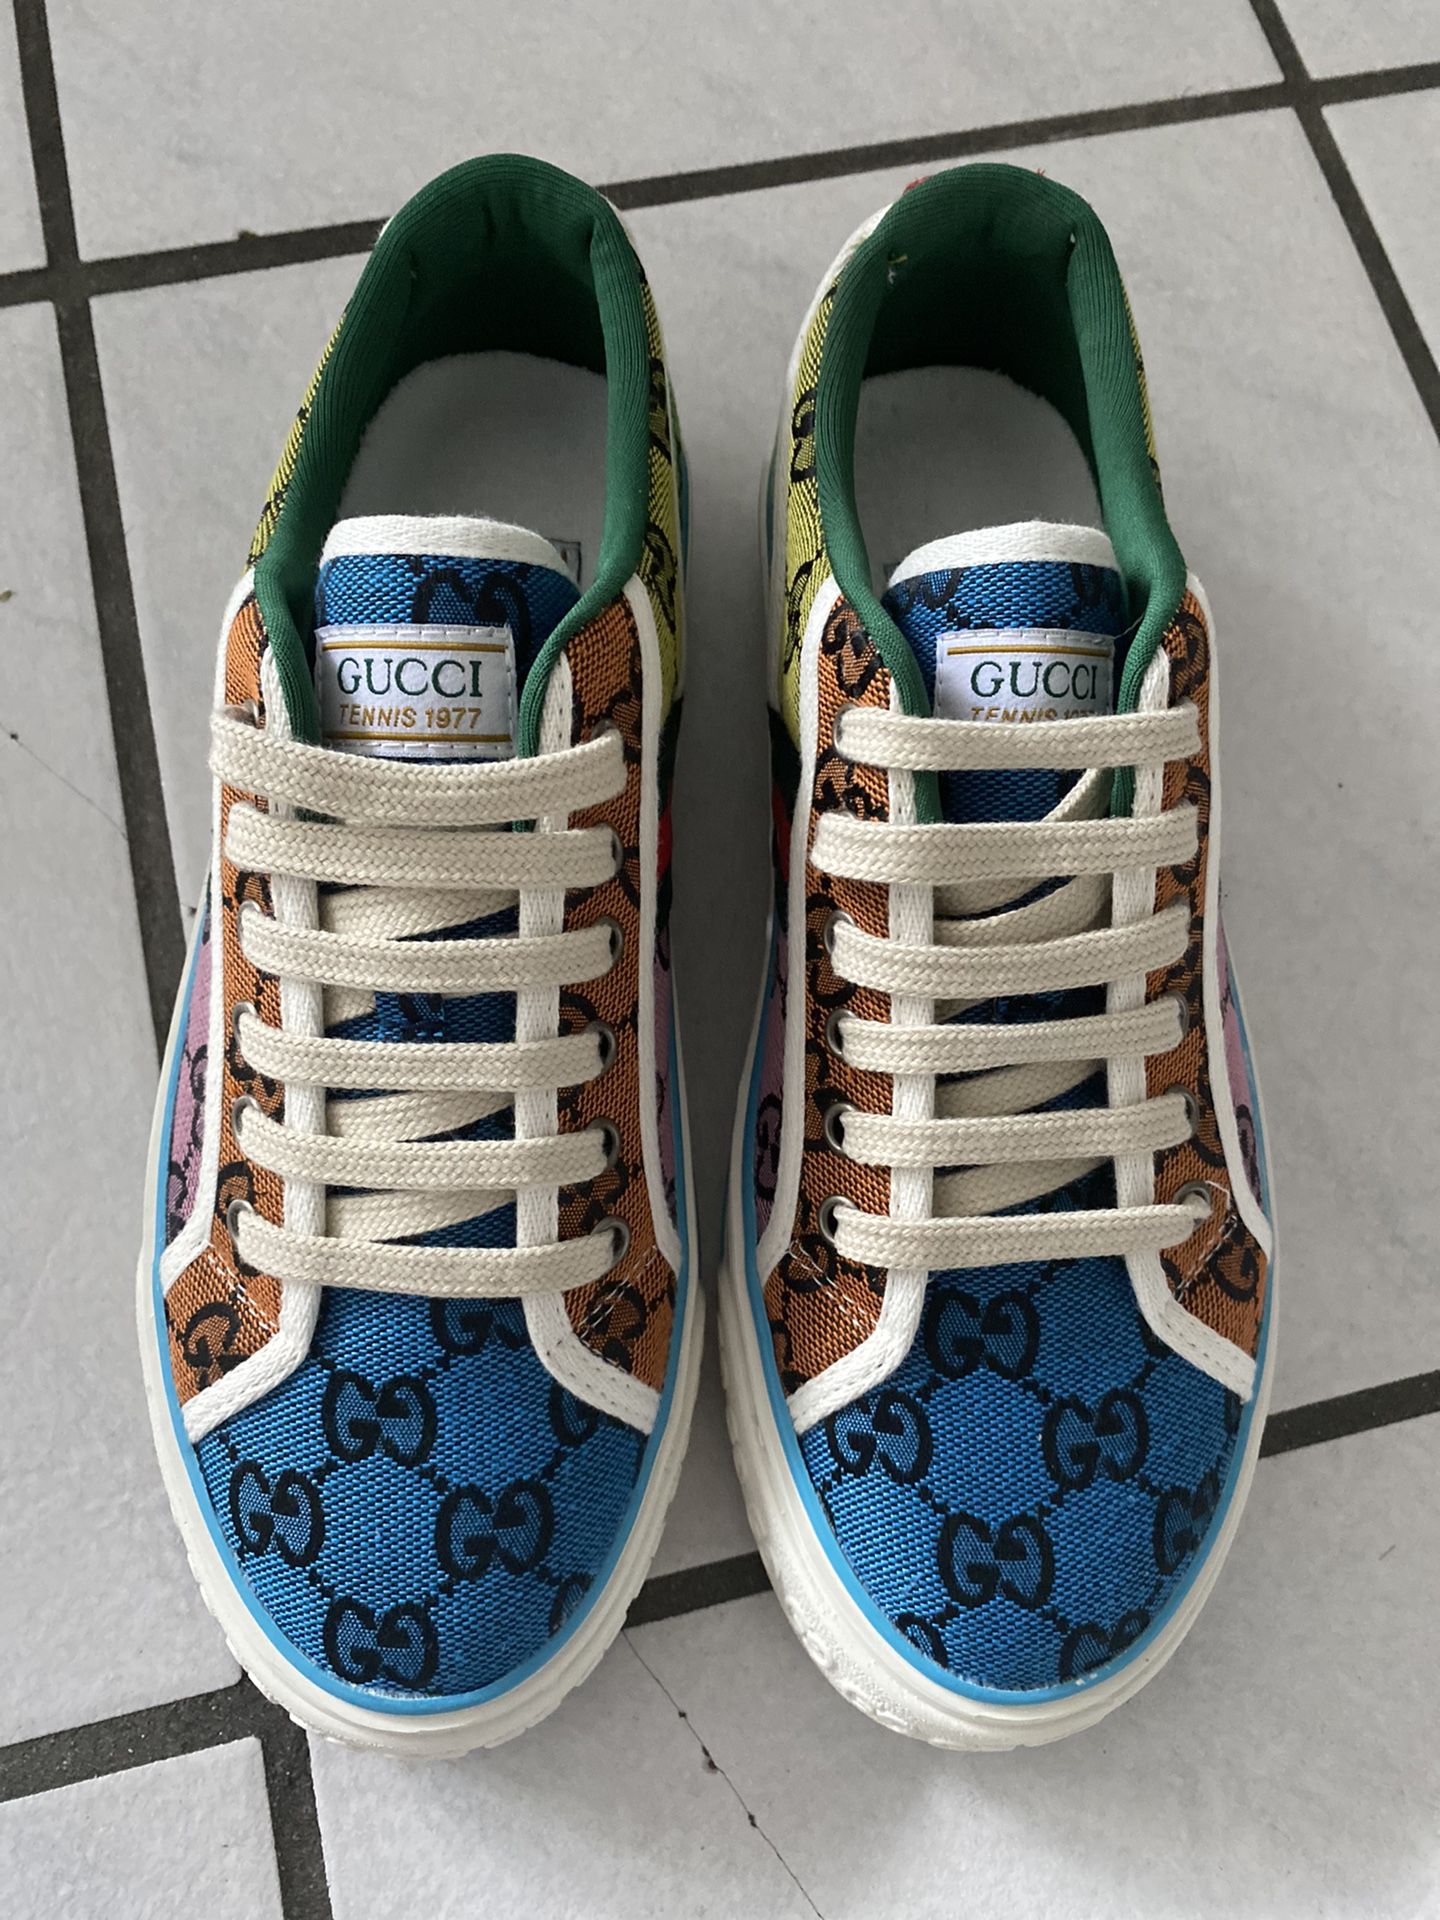 Multicolor Gucci Tennis Shoes for Sale in Fort Lauderdale, FL - OfferUp